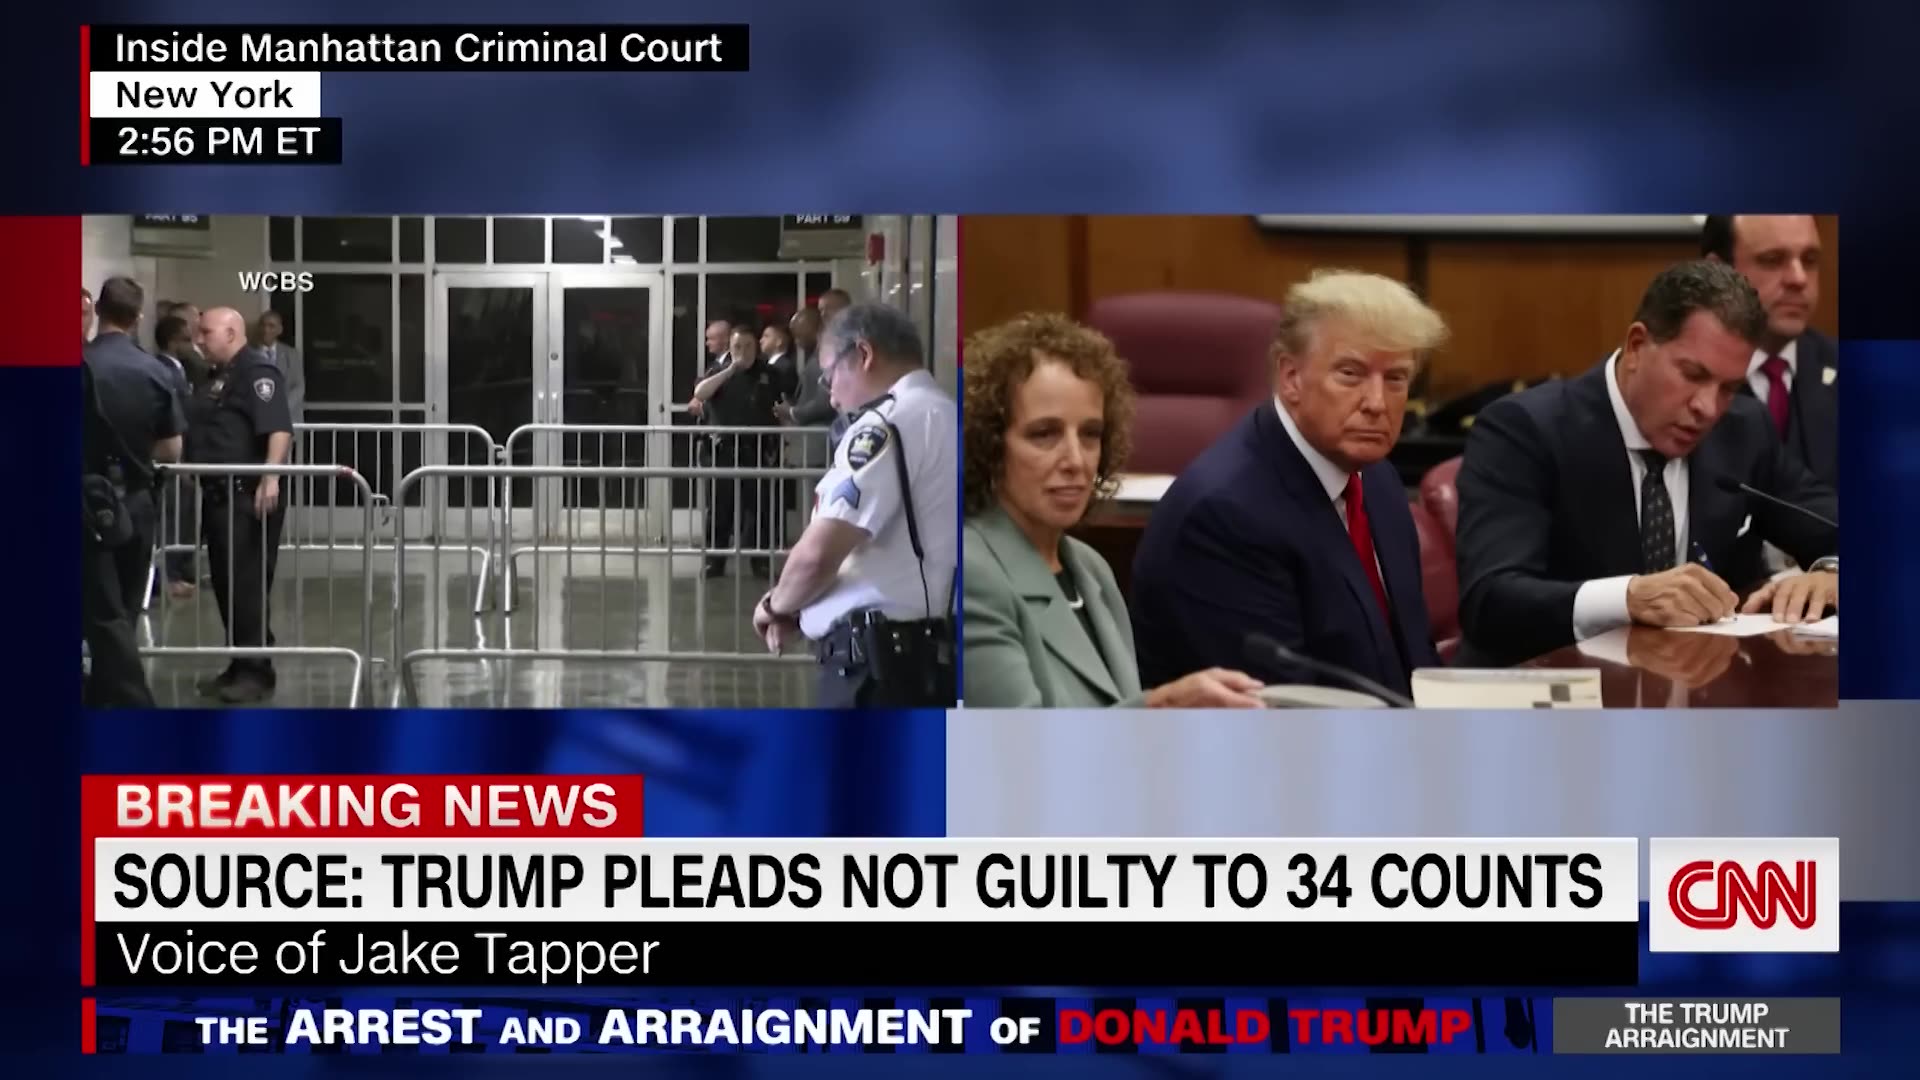 ‘That is an angry Donald Trump’- Analyst on Trump court photos